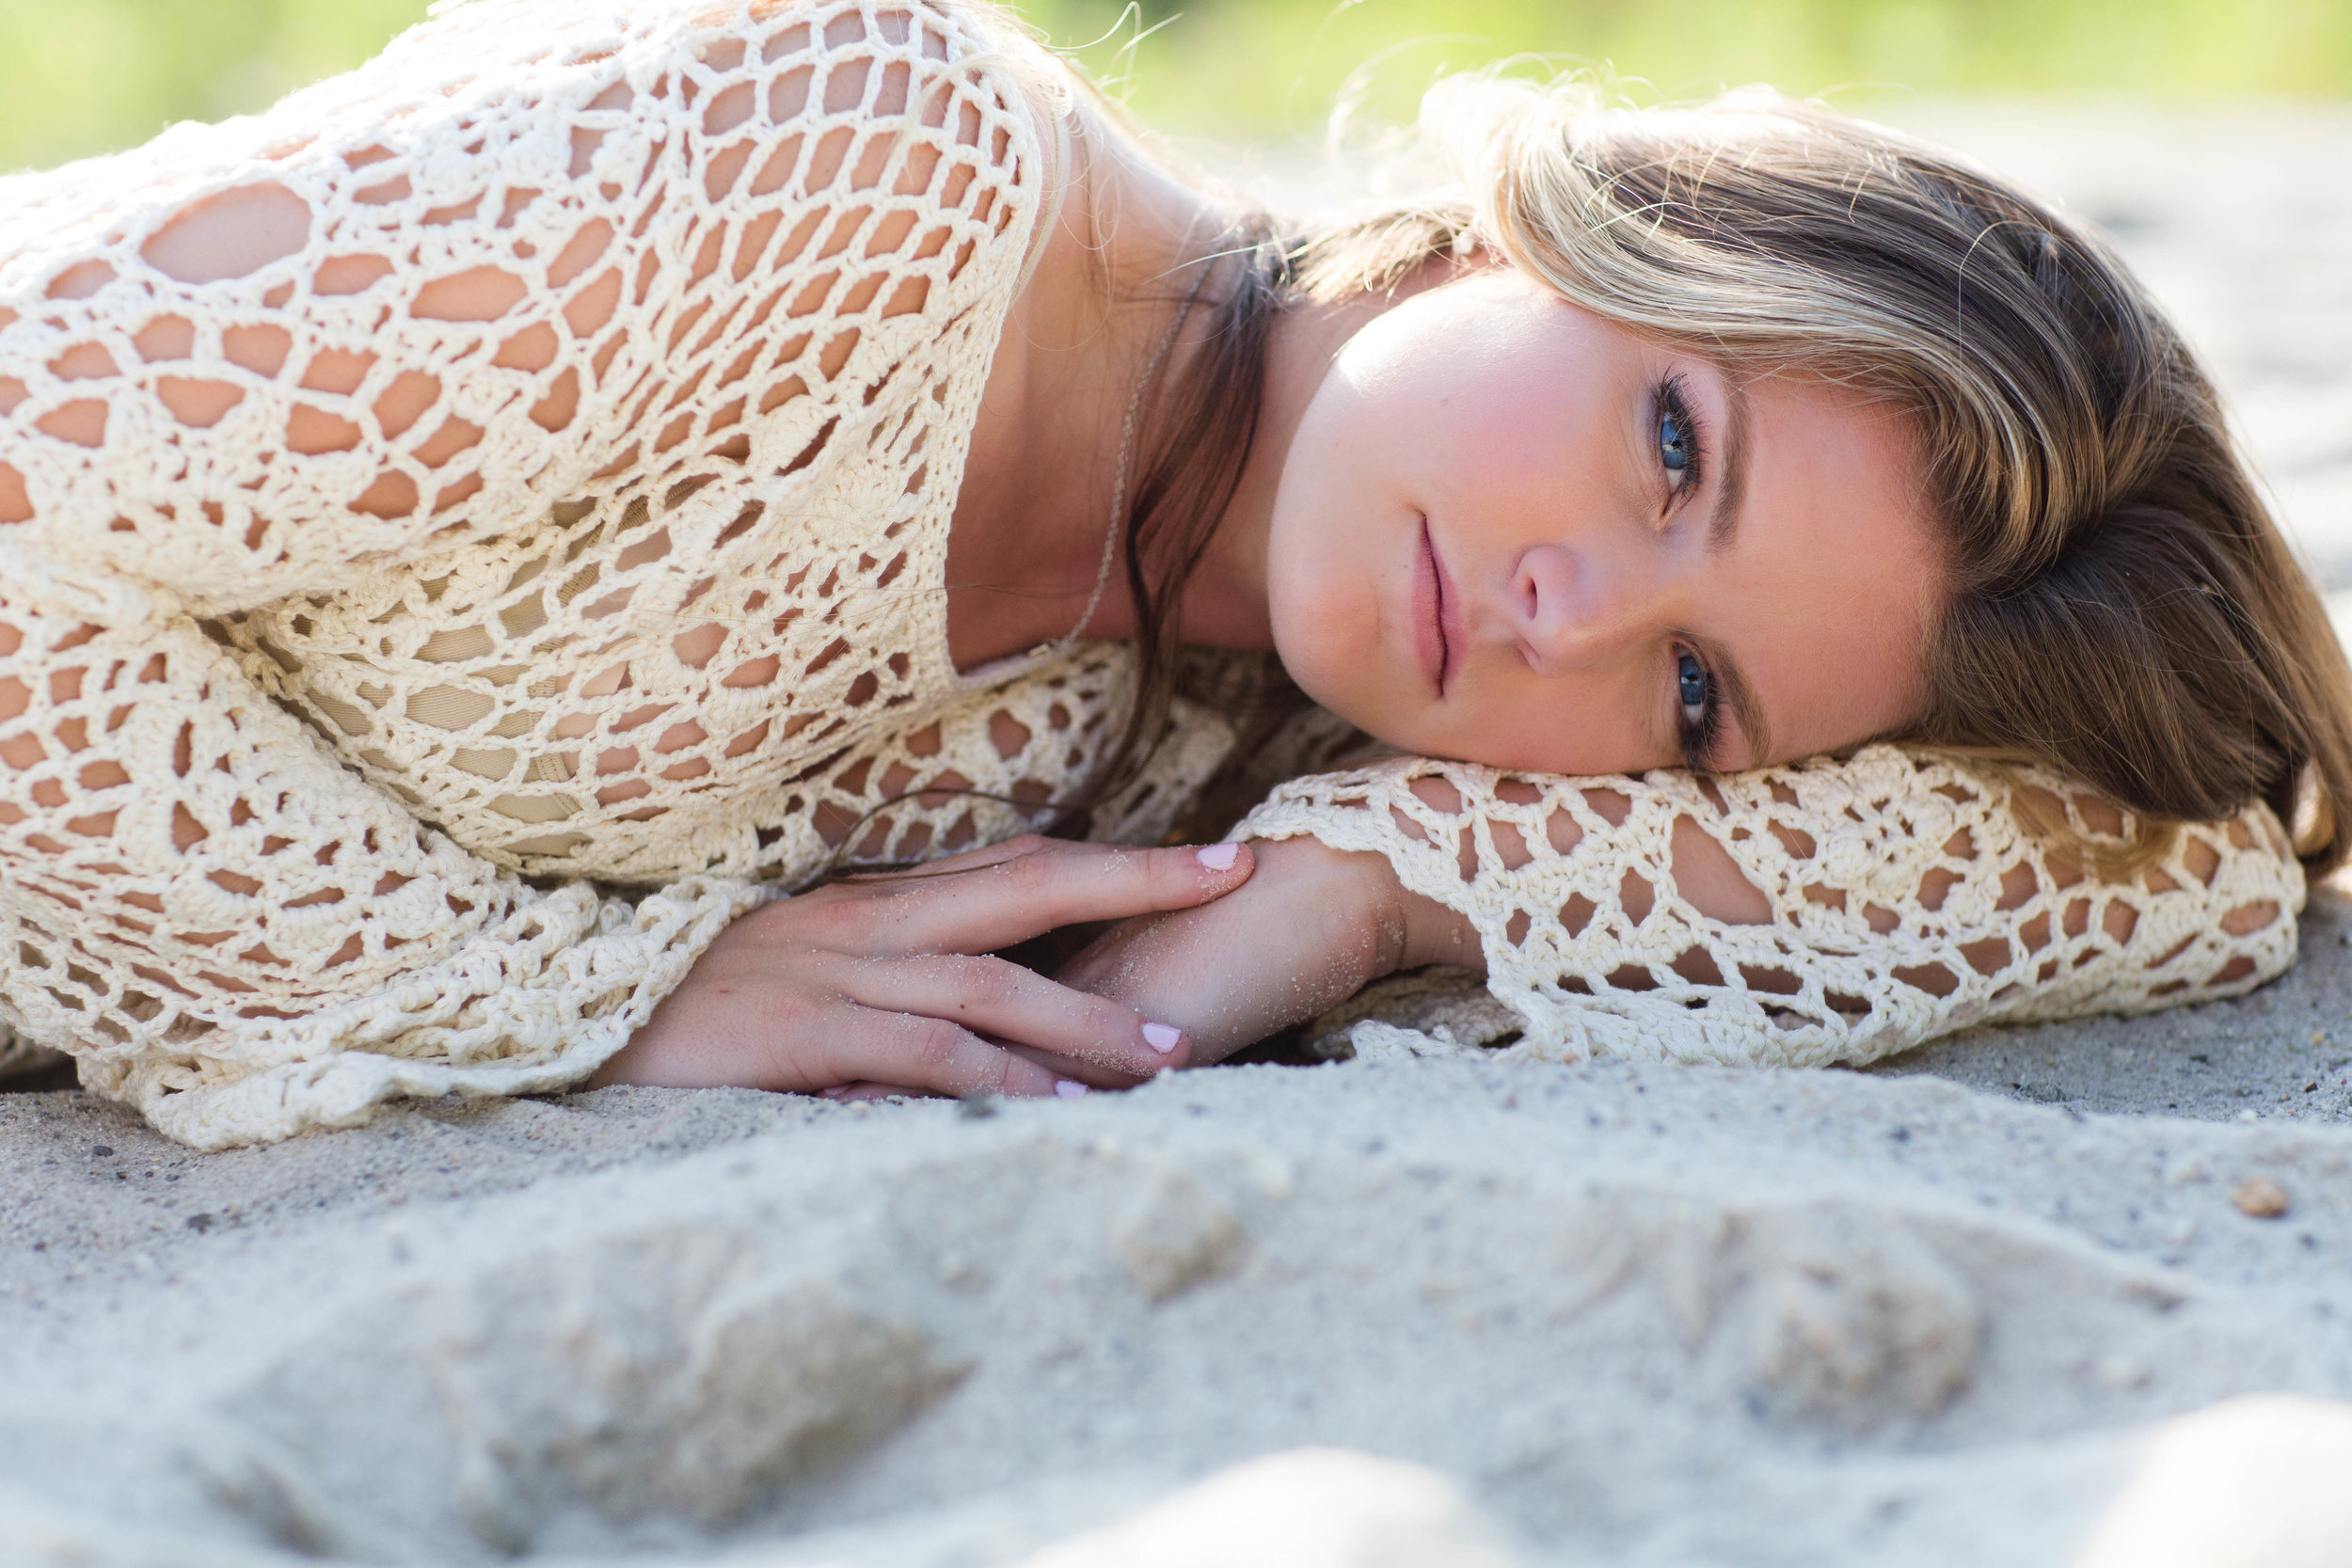 Teen portrait of a girl laying in the sand at beach